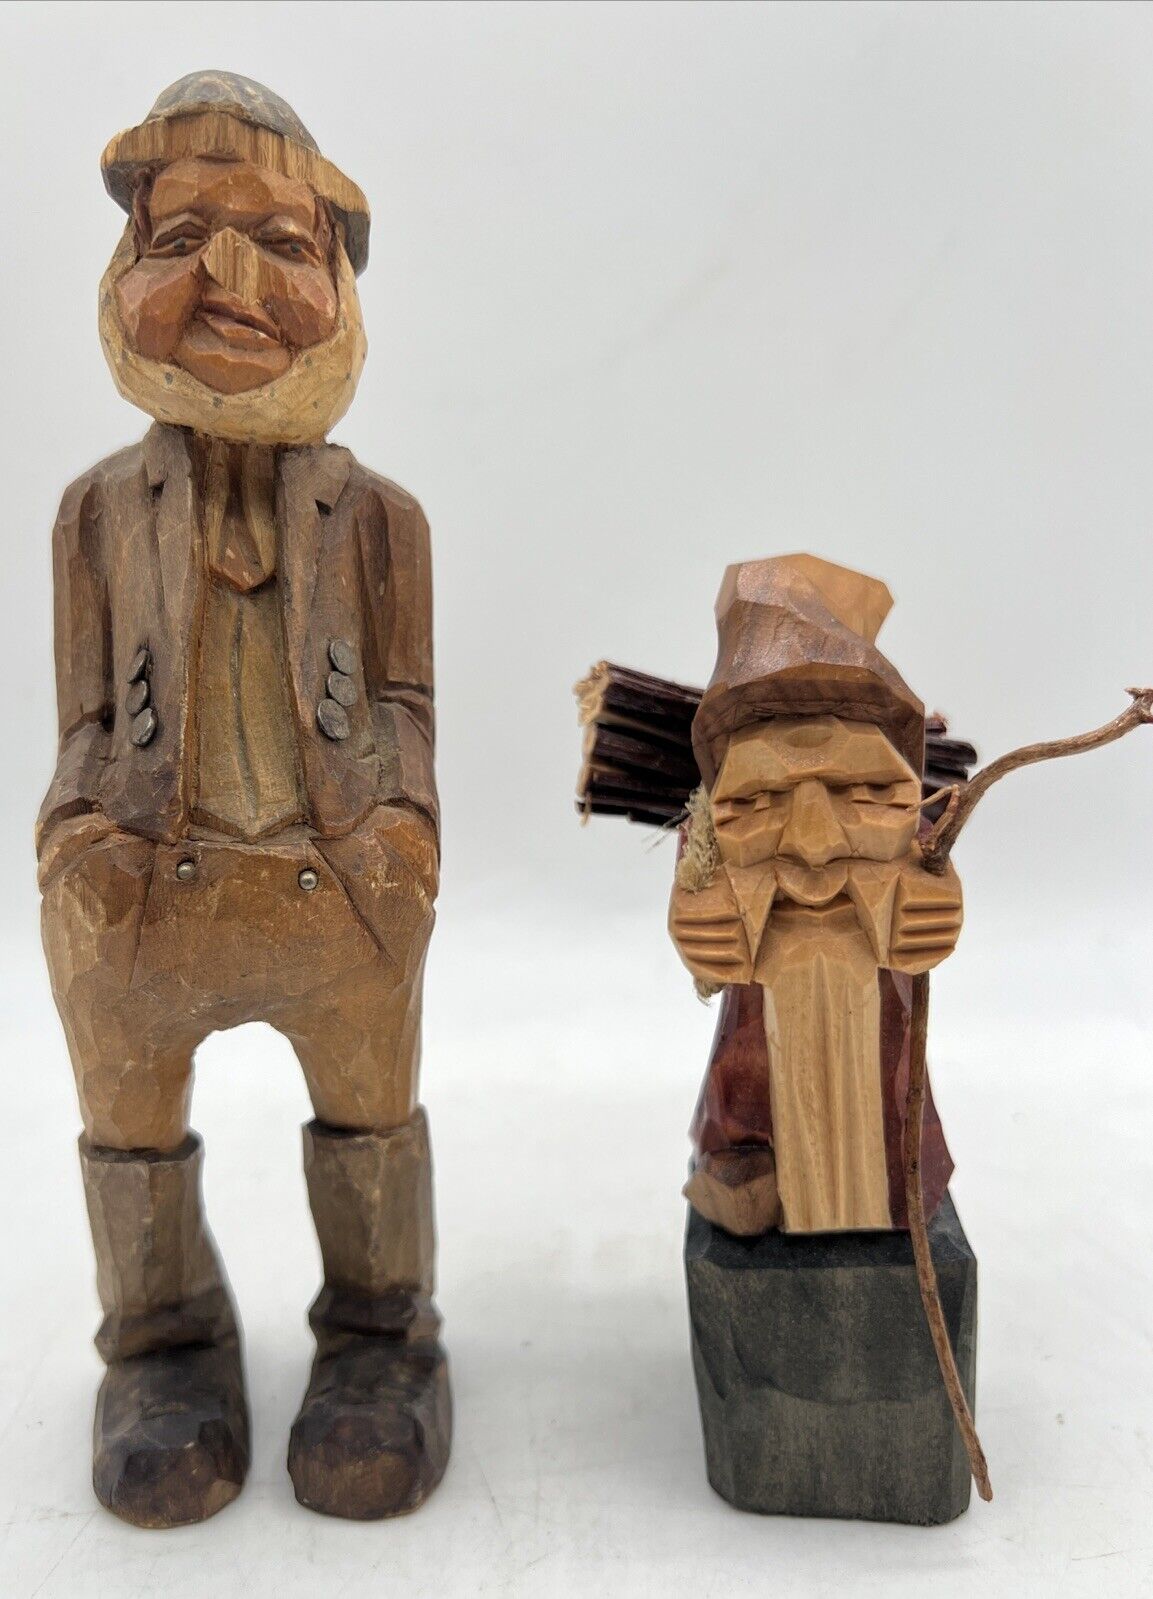 Vintage Hand Carved Wood Folk Art Figurines “Man Hands In Pockets” and “Gnome”